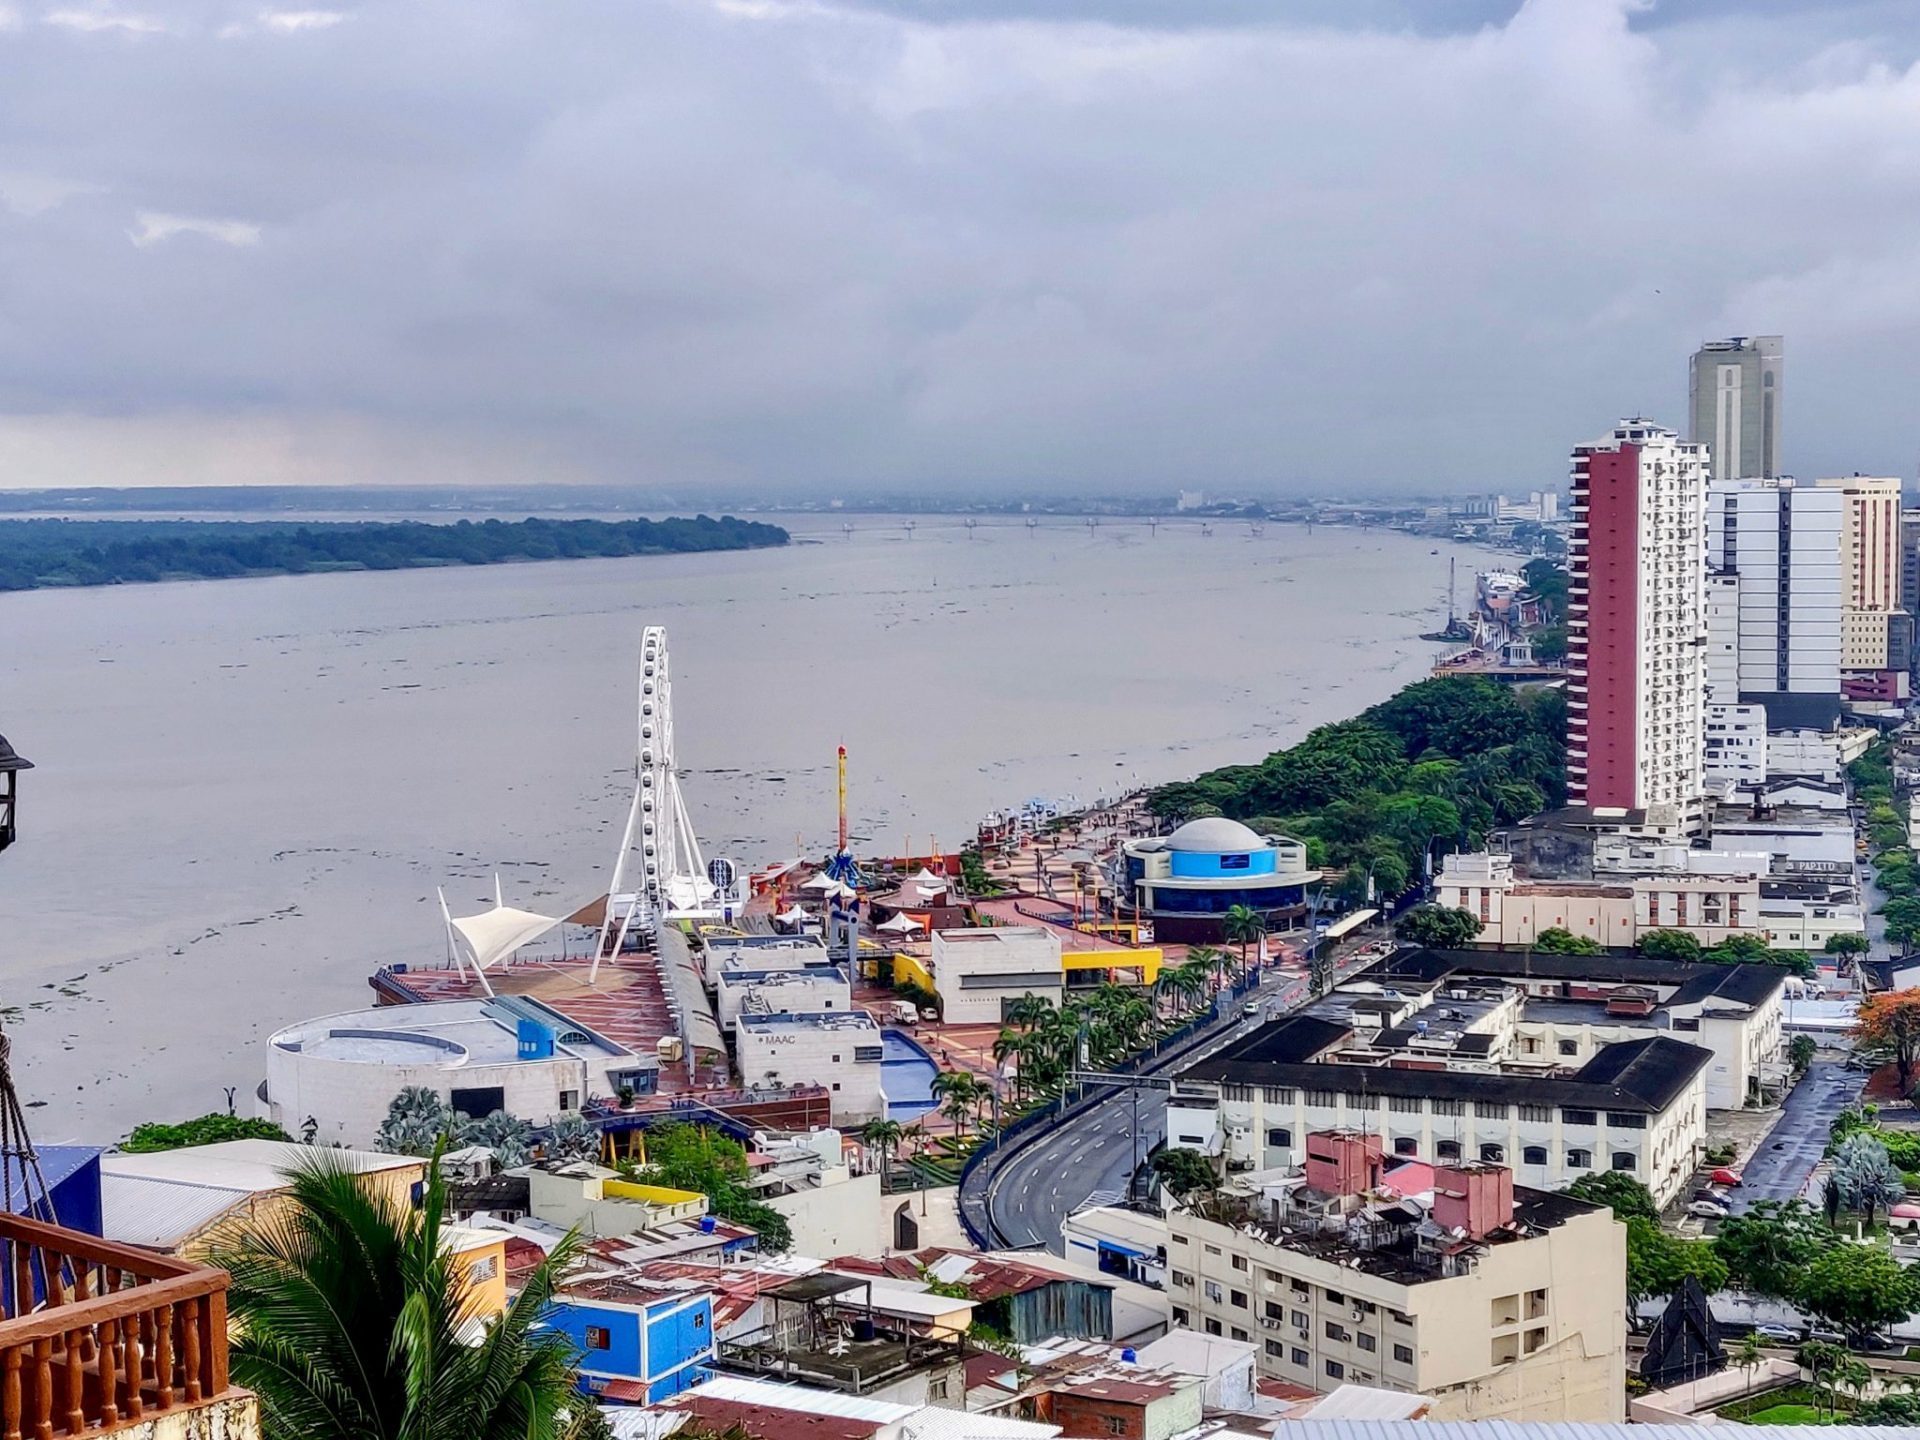 Travel Tips and Guayaquil Safety.